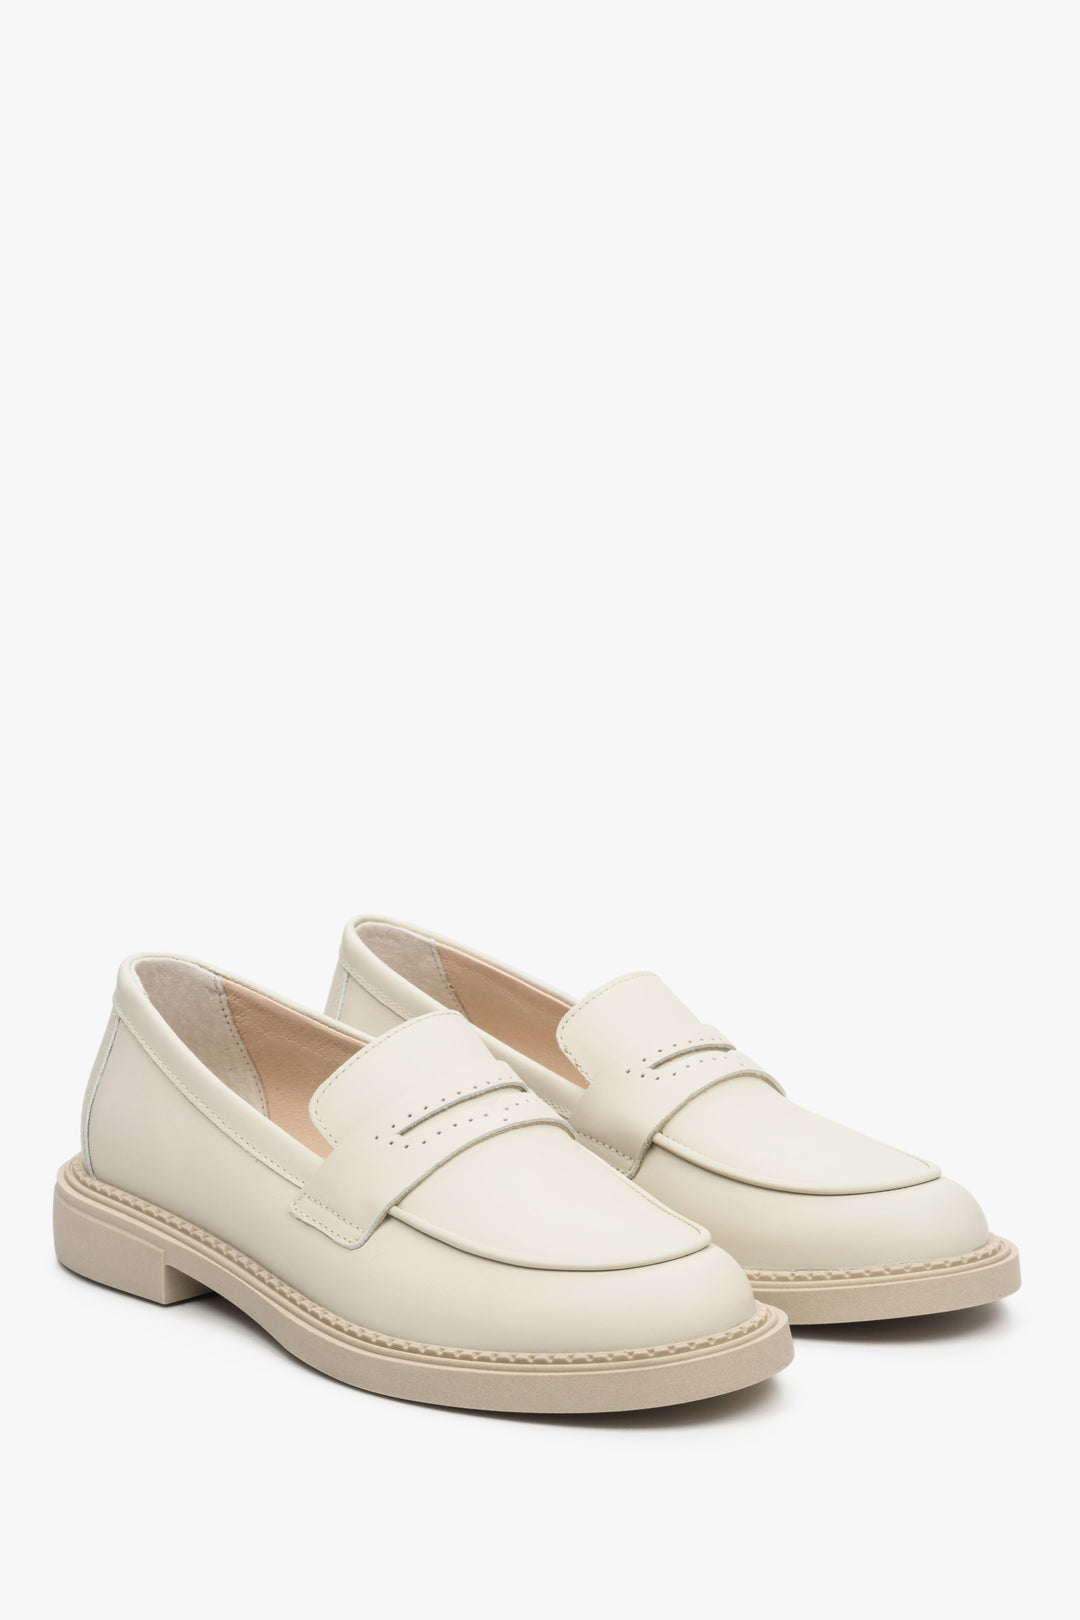 Women's beige leather loafers for spring Estro.